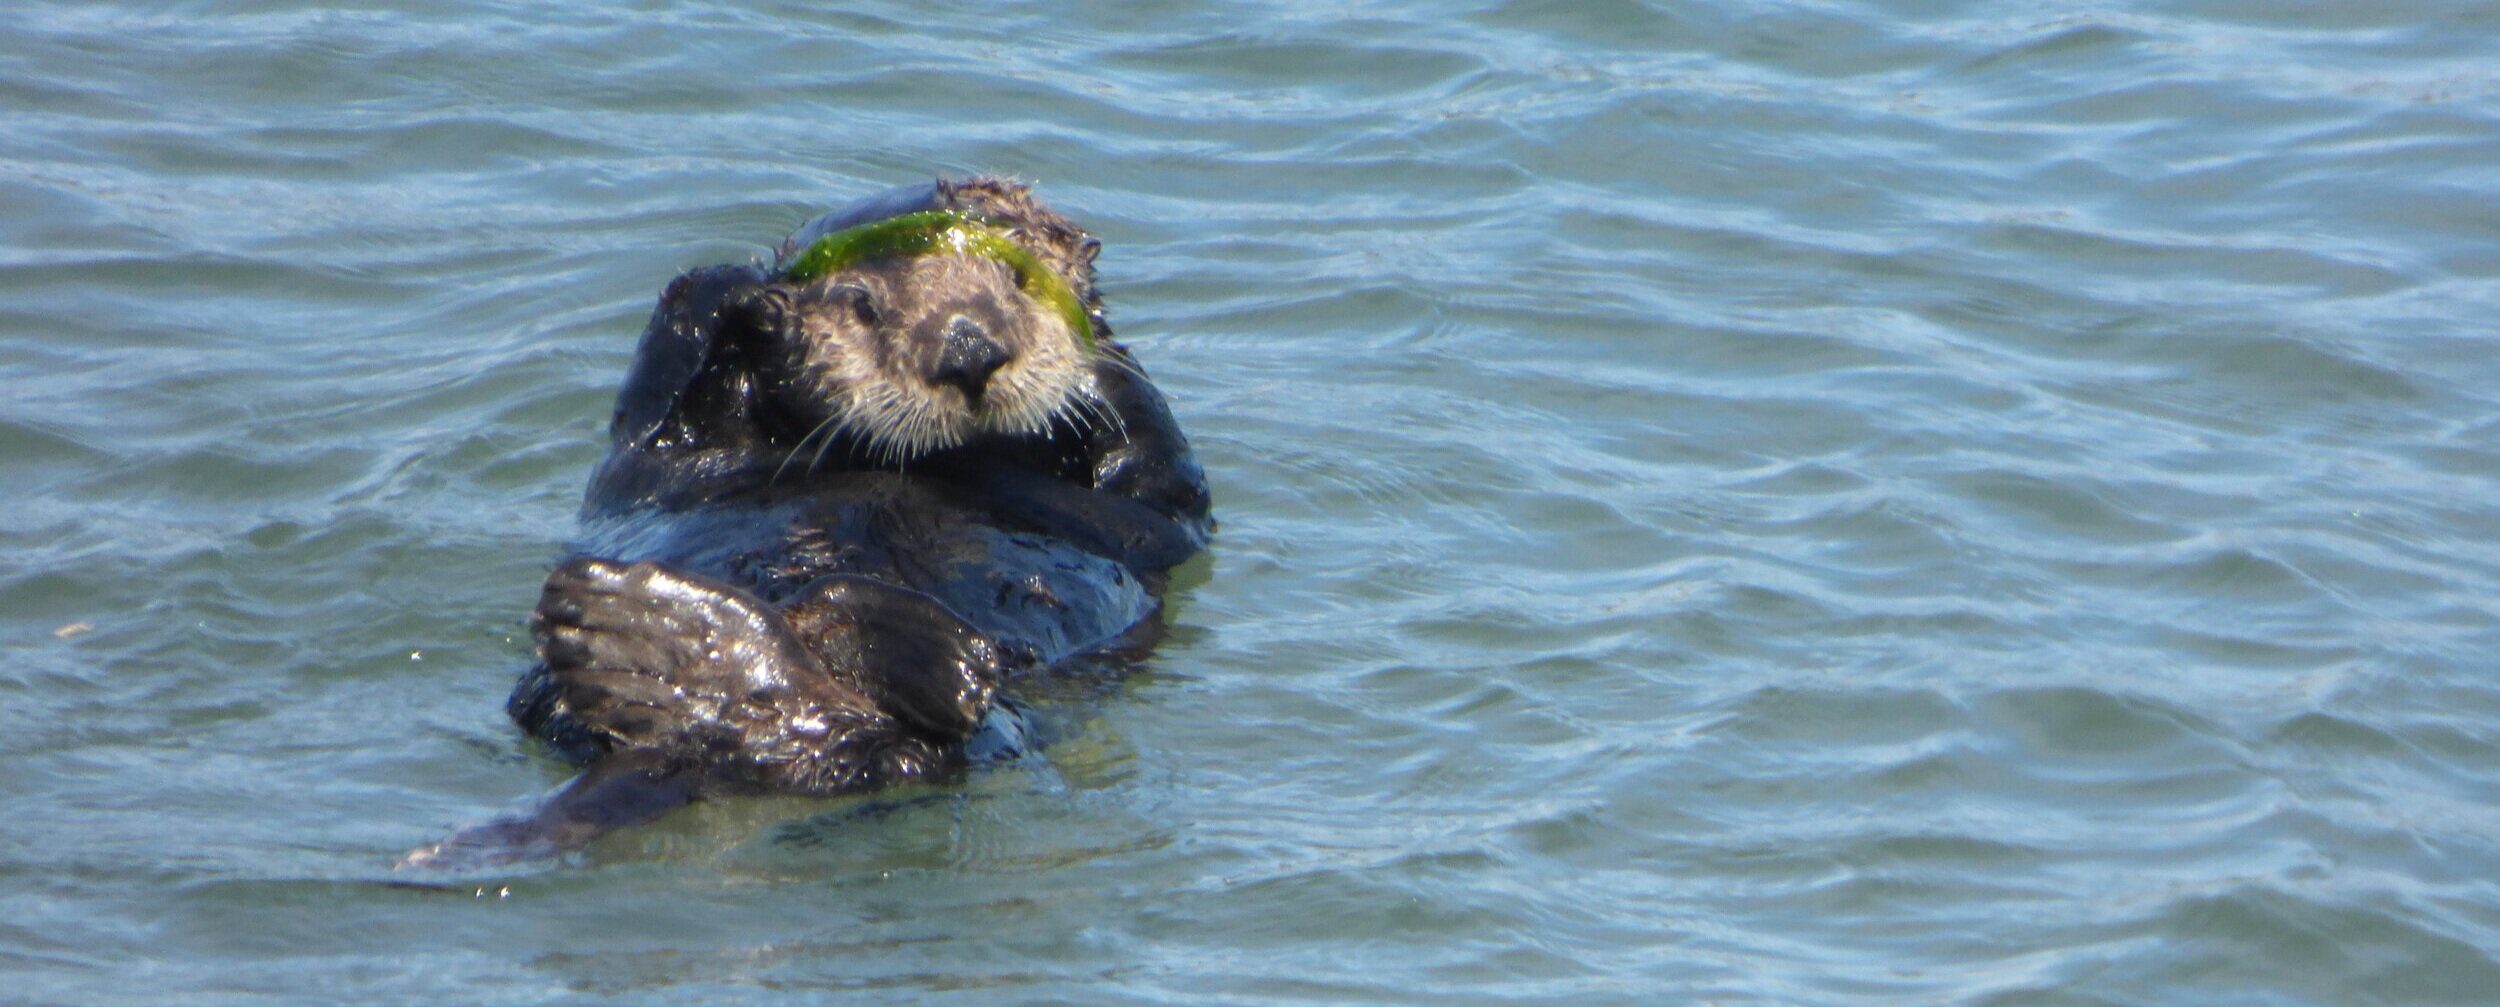 Sound View Camp - Family Campground / Outdoor Environmental Education -  Otters!